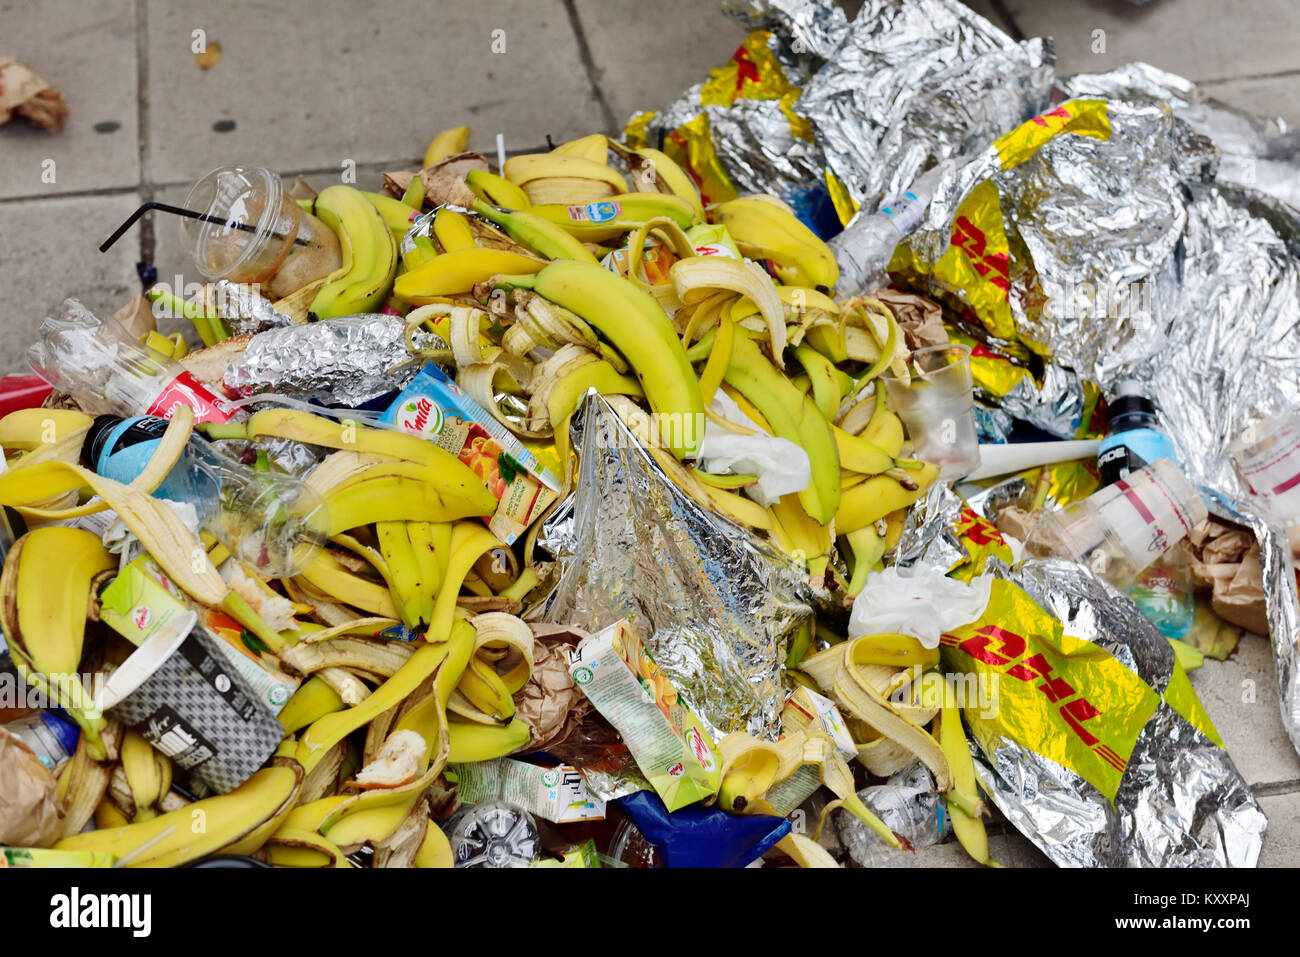 Banana peals, thermal foil sheets, drinks discarded after runners finish marathon race Stock Photo